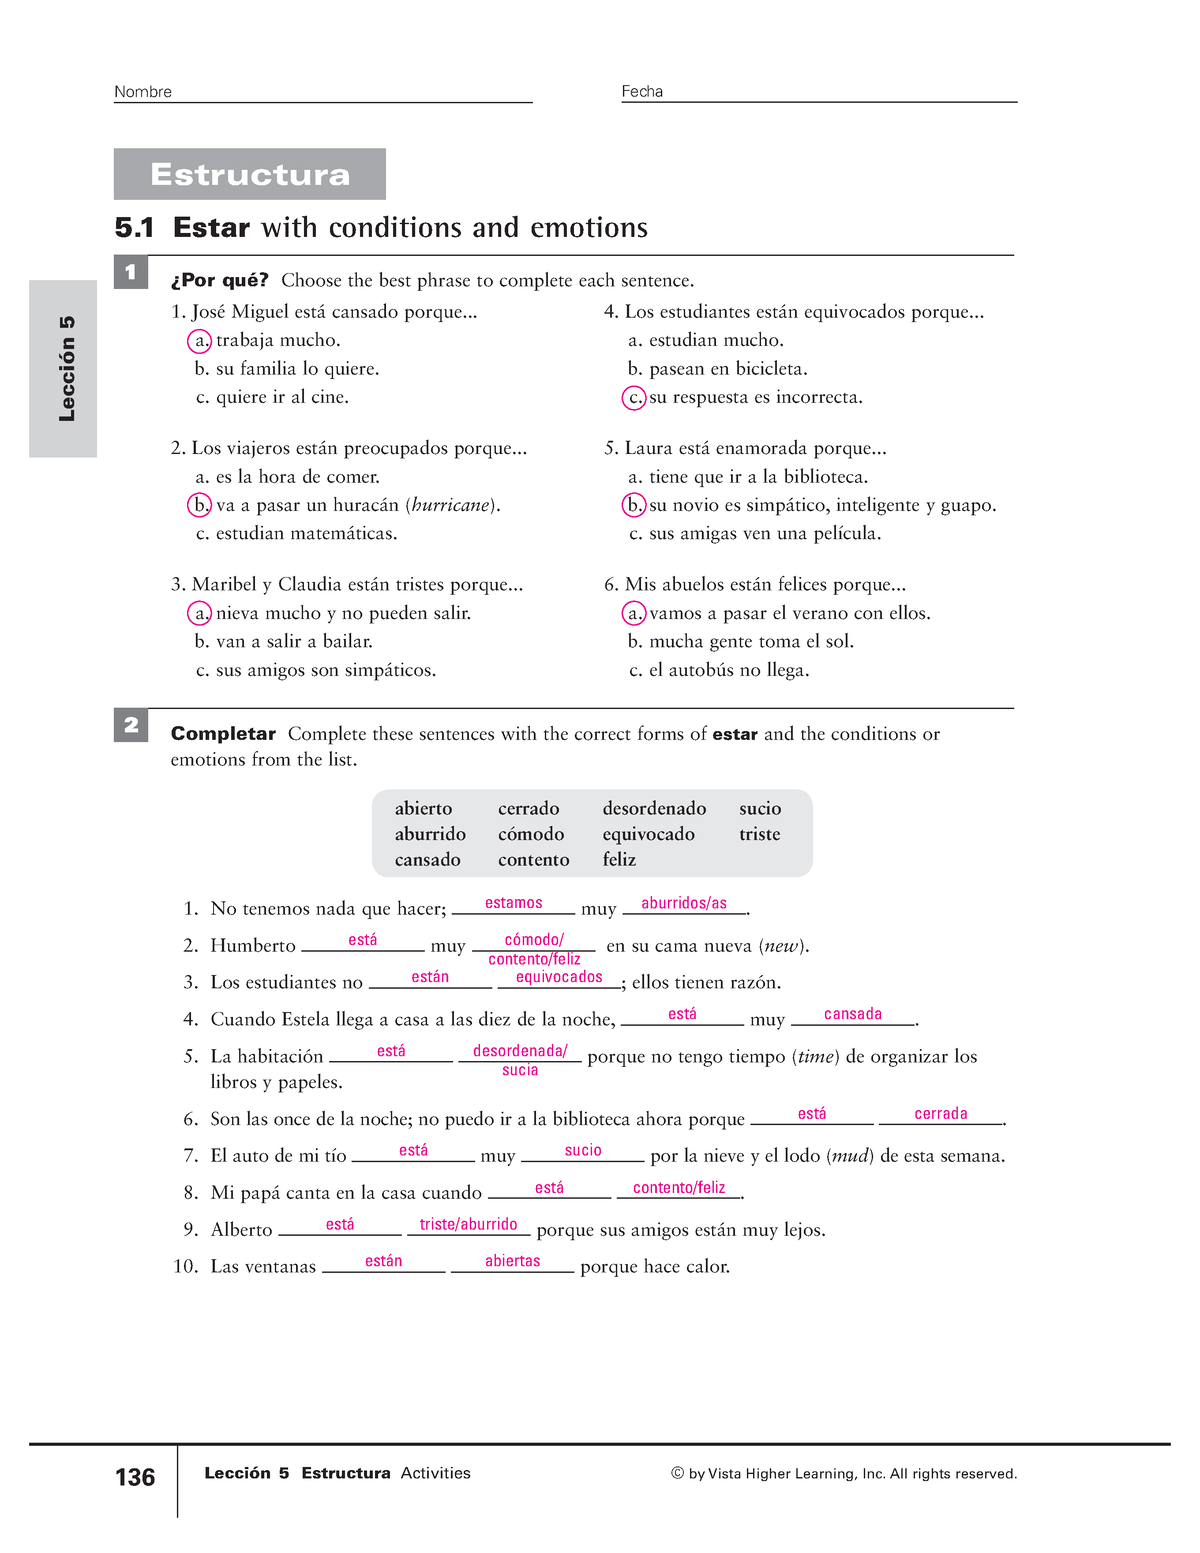 wb-answers-for-mutation-136-lecci-n-5-estructura-activities-by-vista-higher-learning-inc